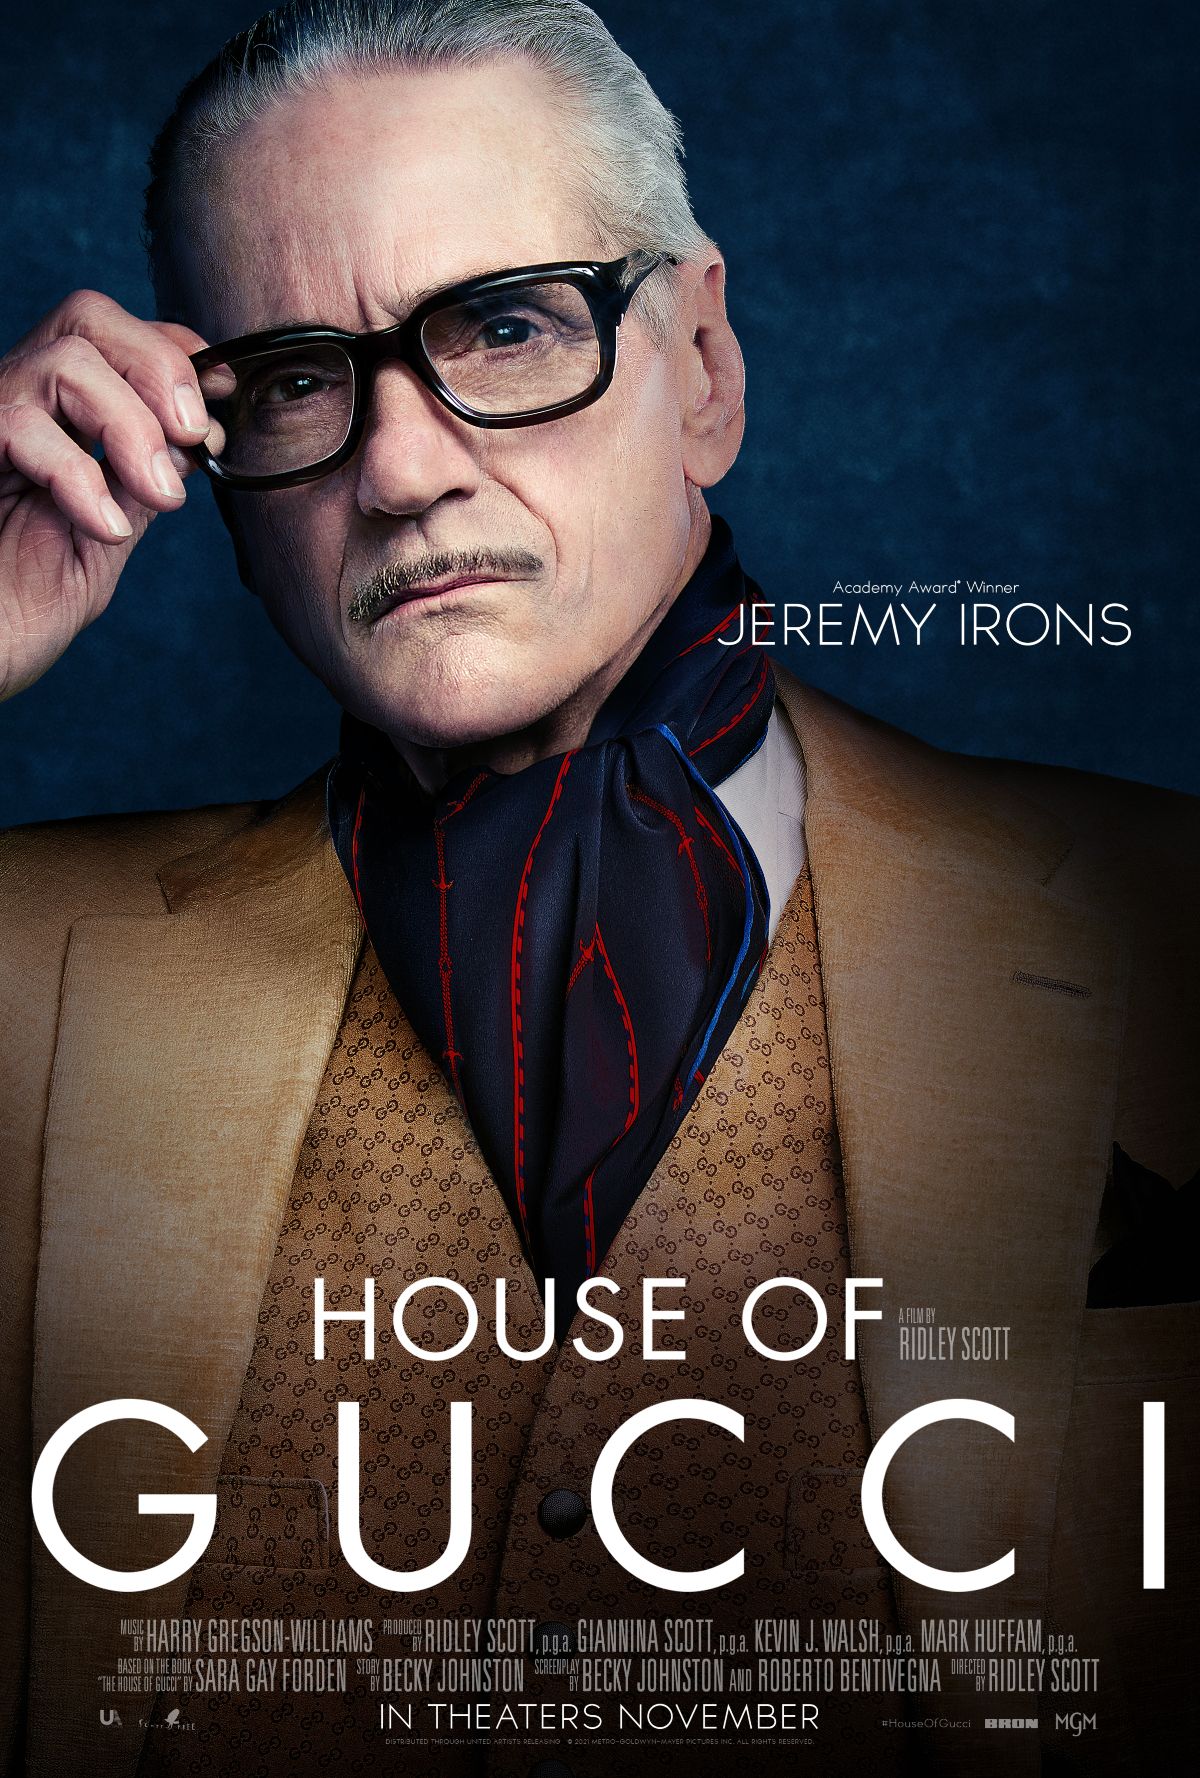 house-of-gucci-character-poster-jeremy-irons